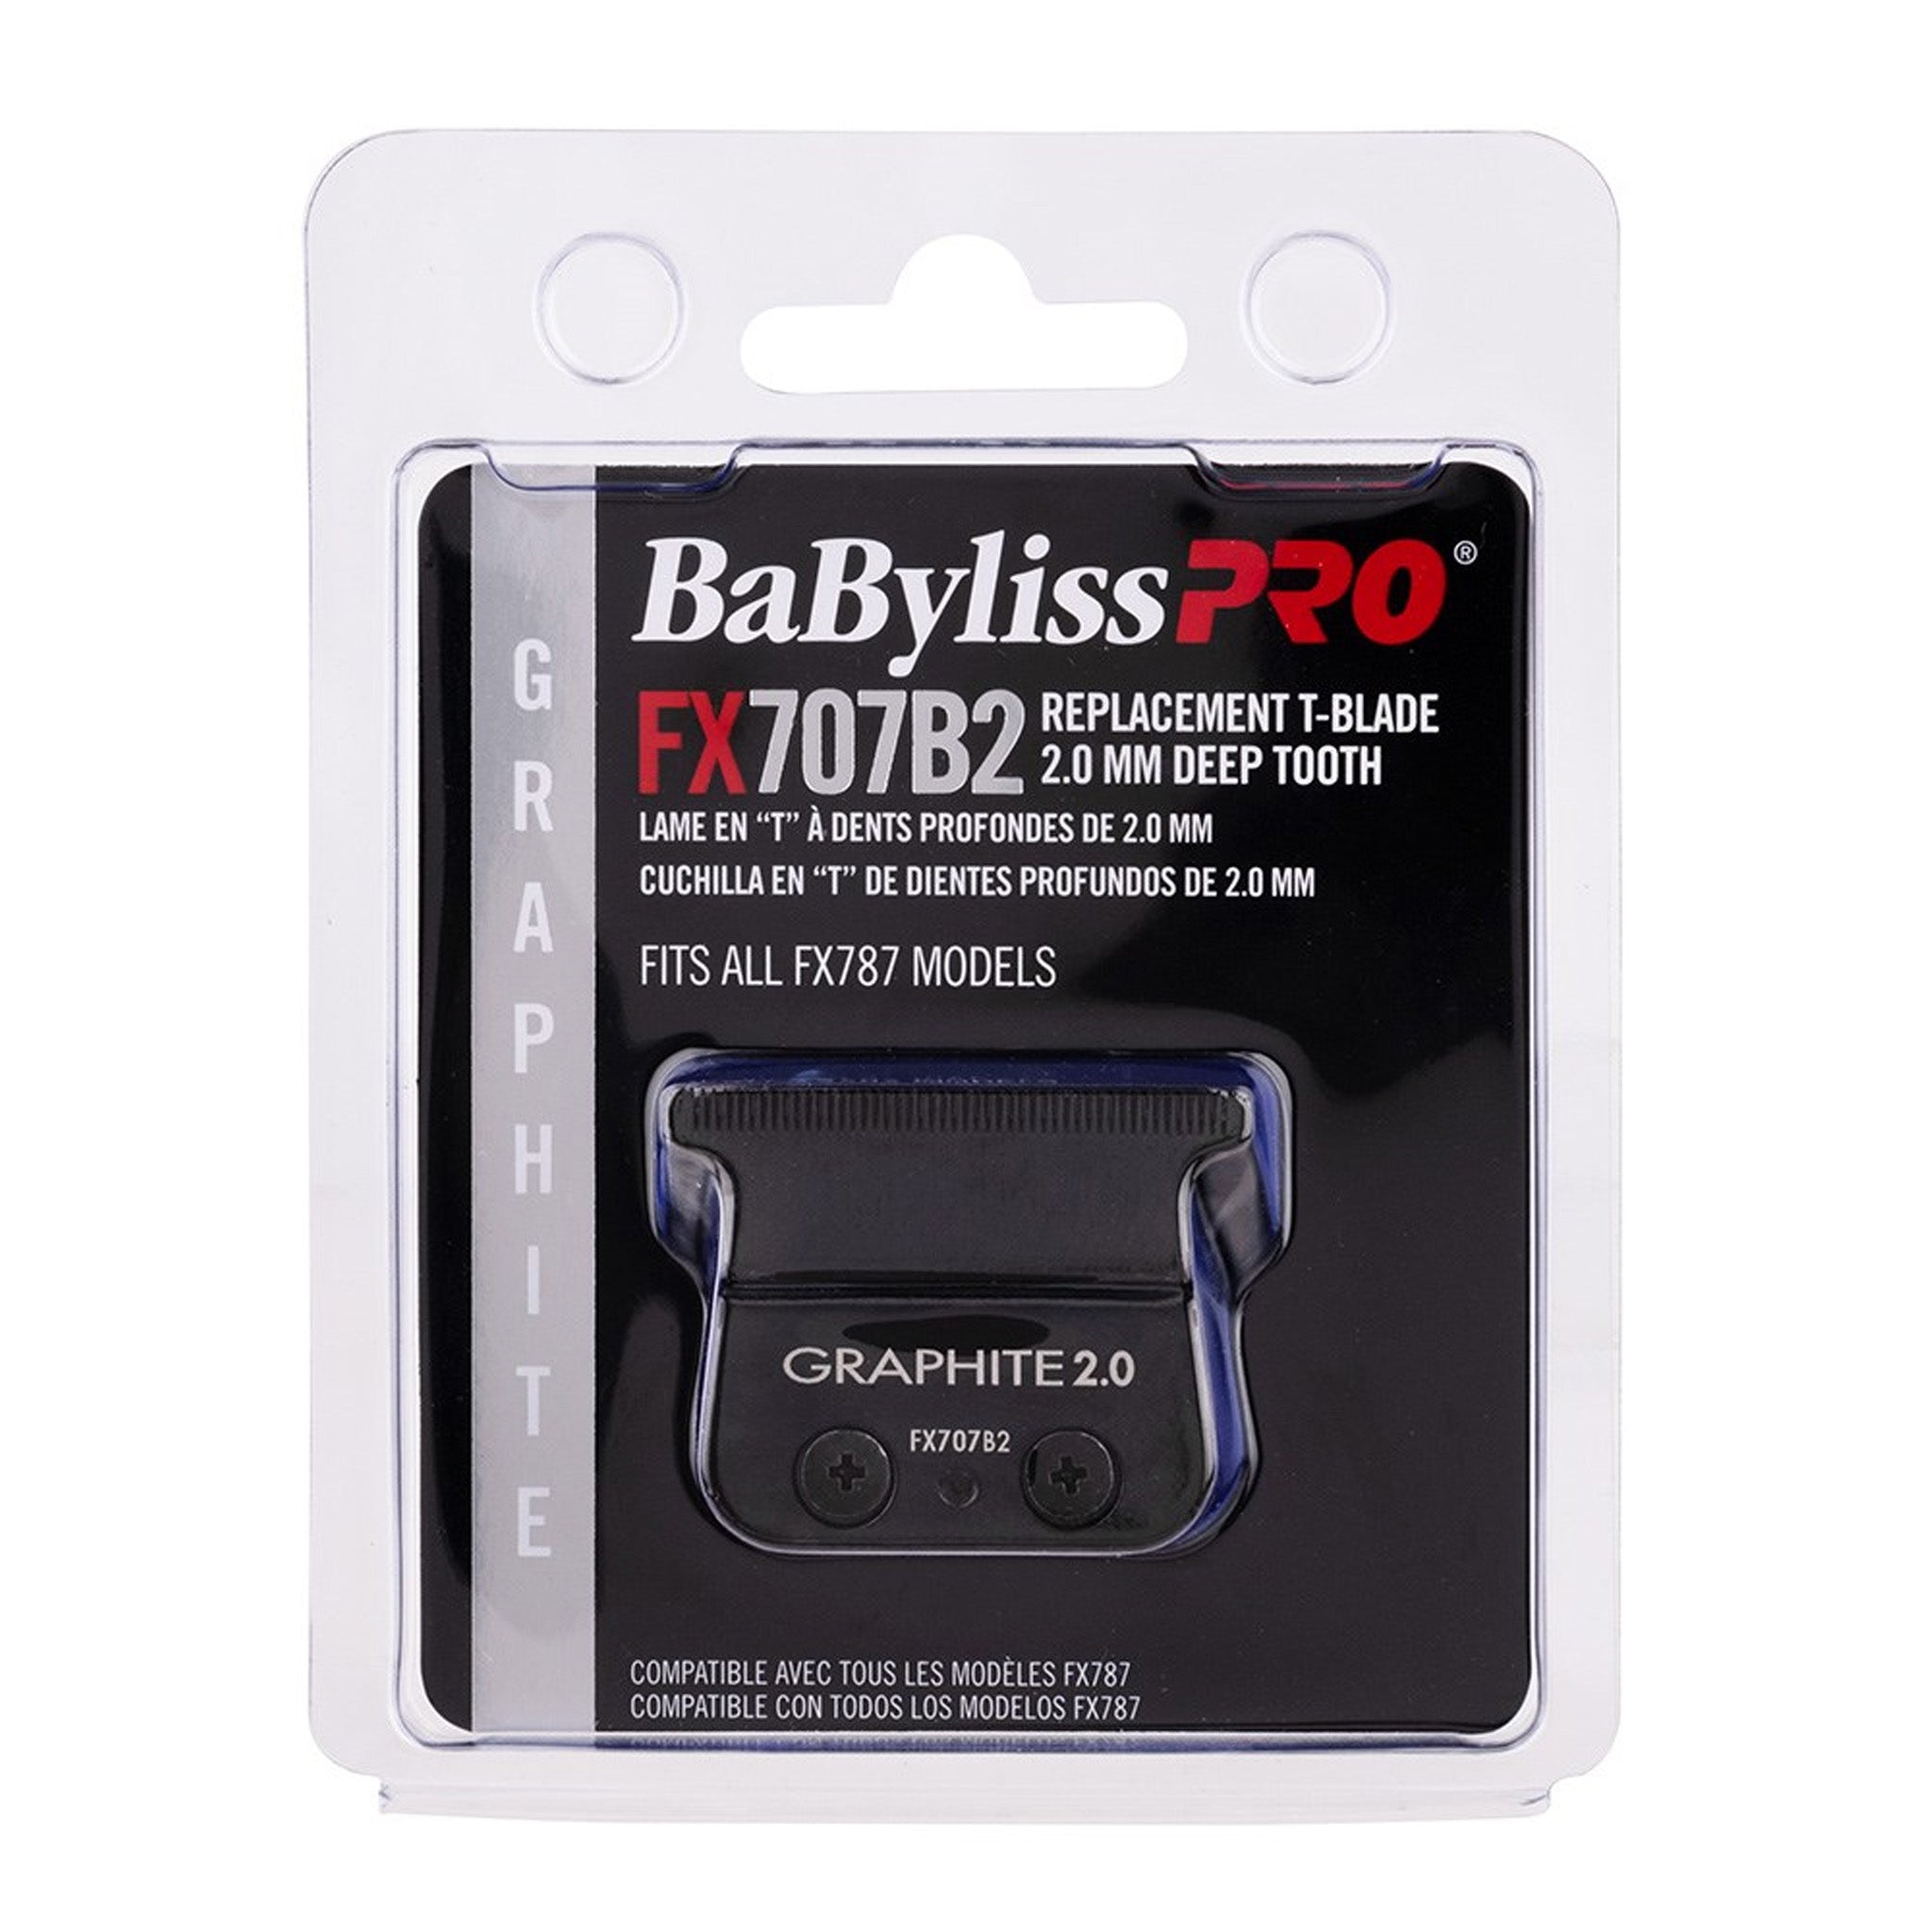 BabylissPRO Replacement Blade Graphite T-Blade 2.0mm Deep Tooth FX707B2